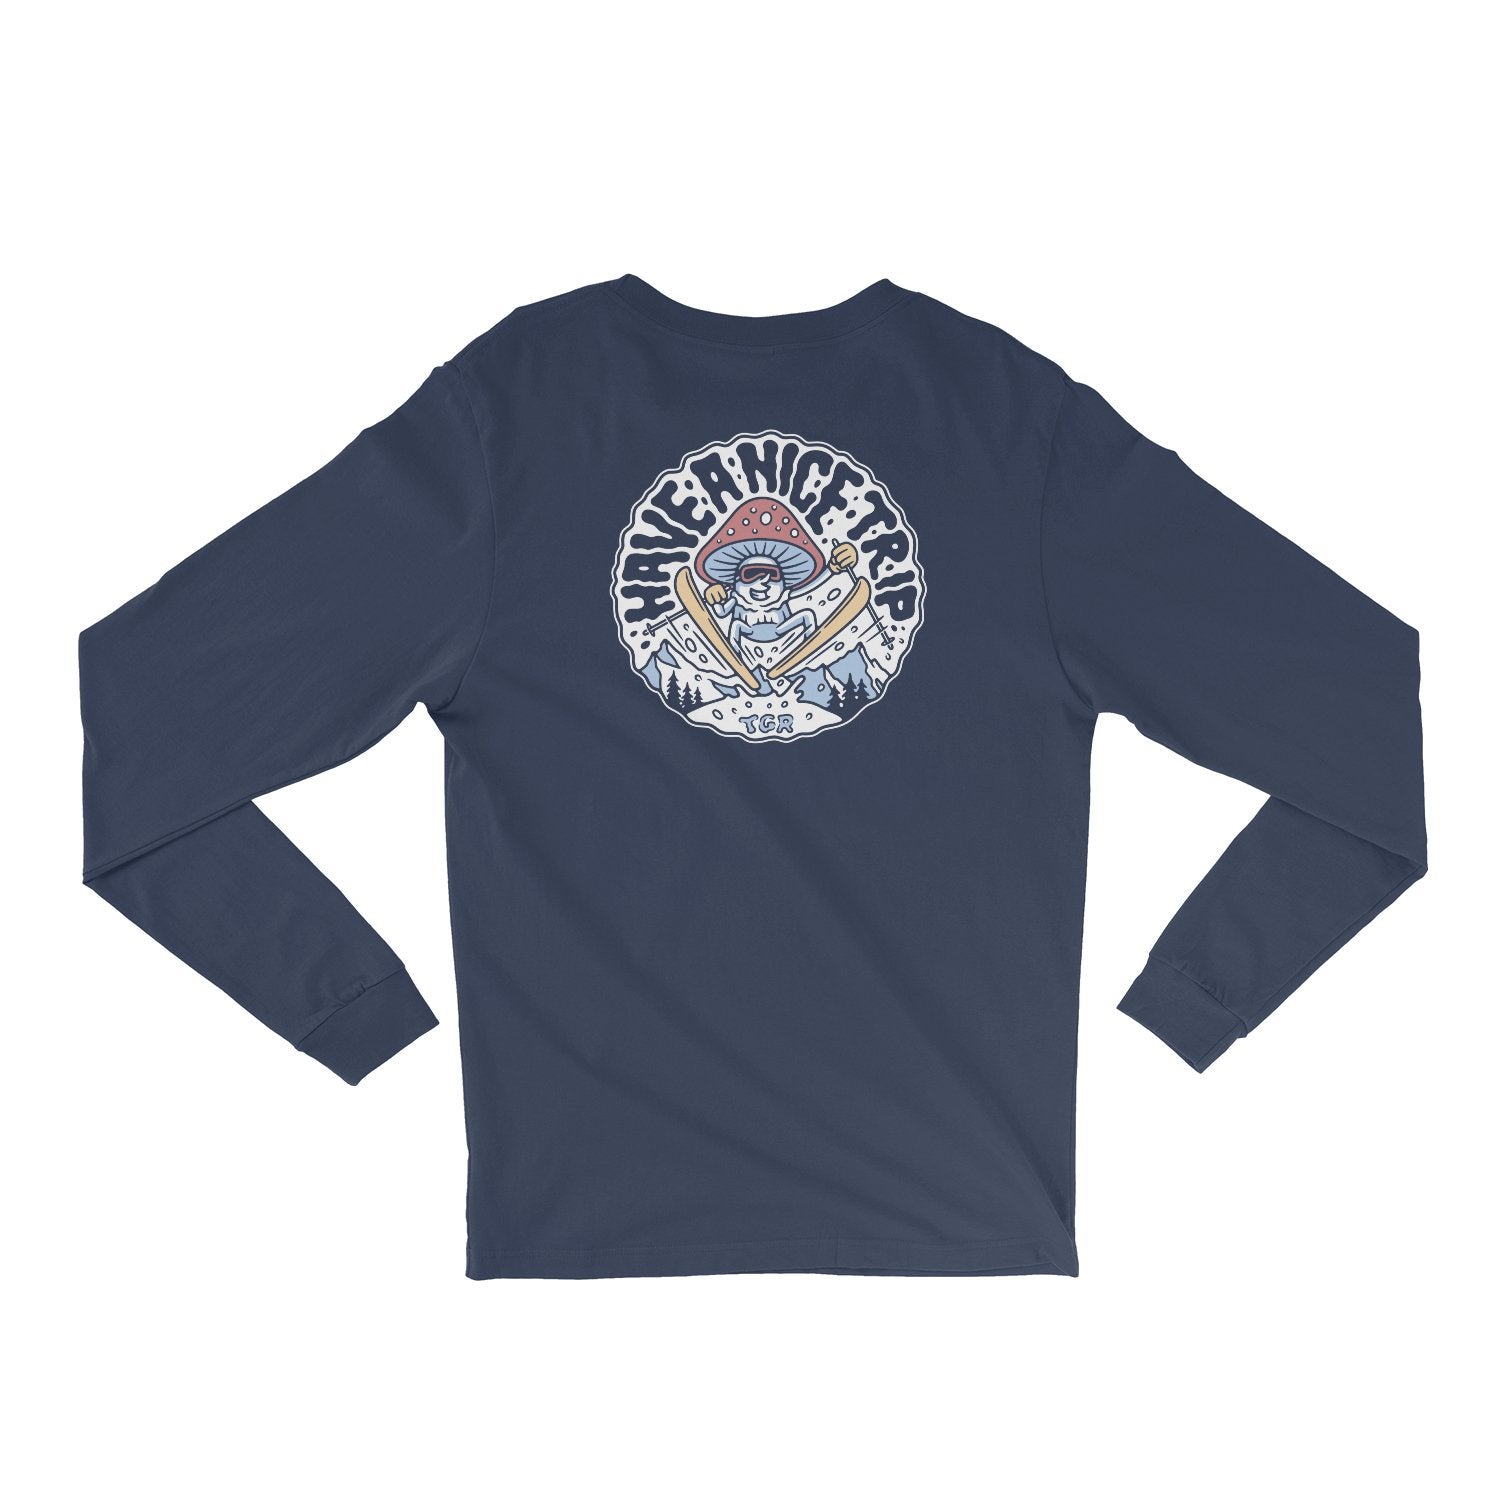 Have A Nice Trip Long Sleeve Tee - Teton Gravity Research